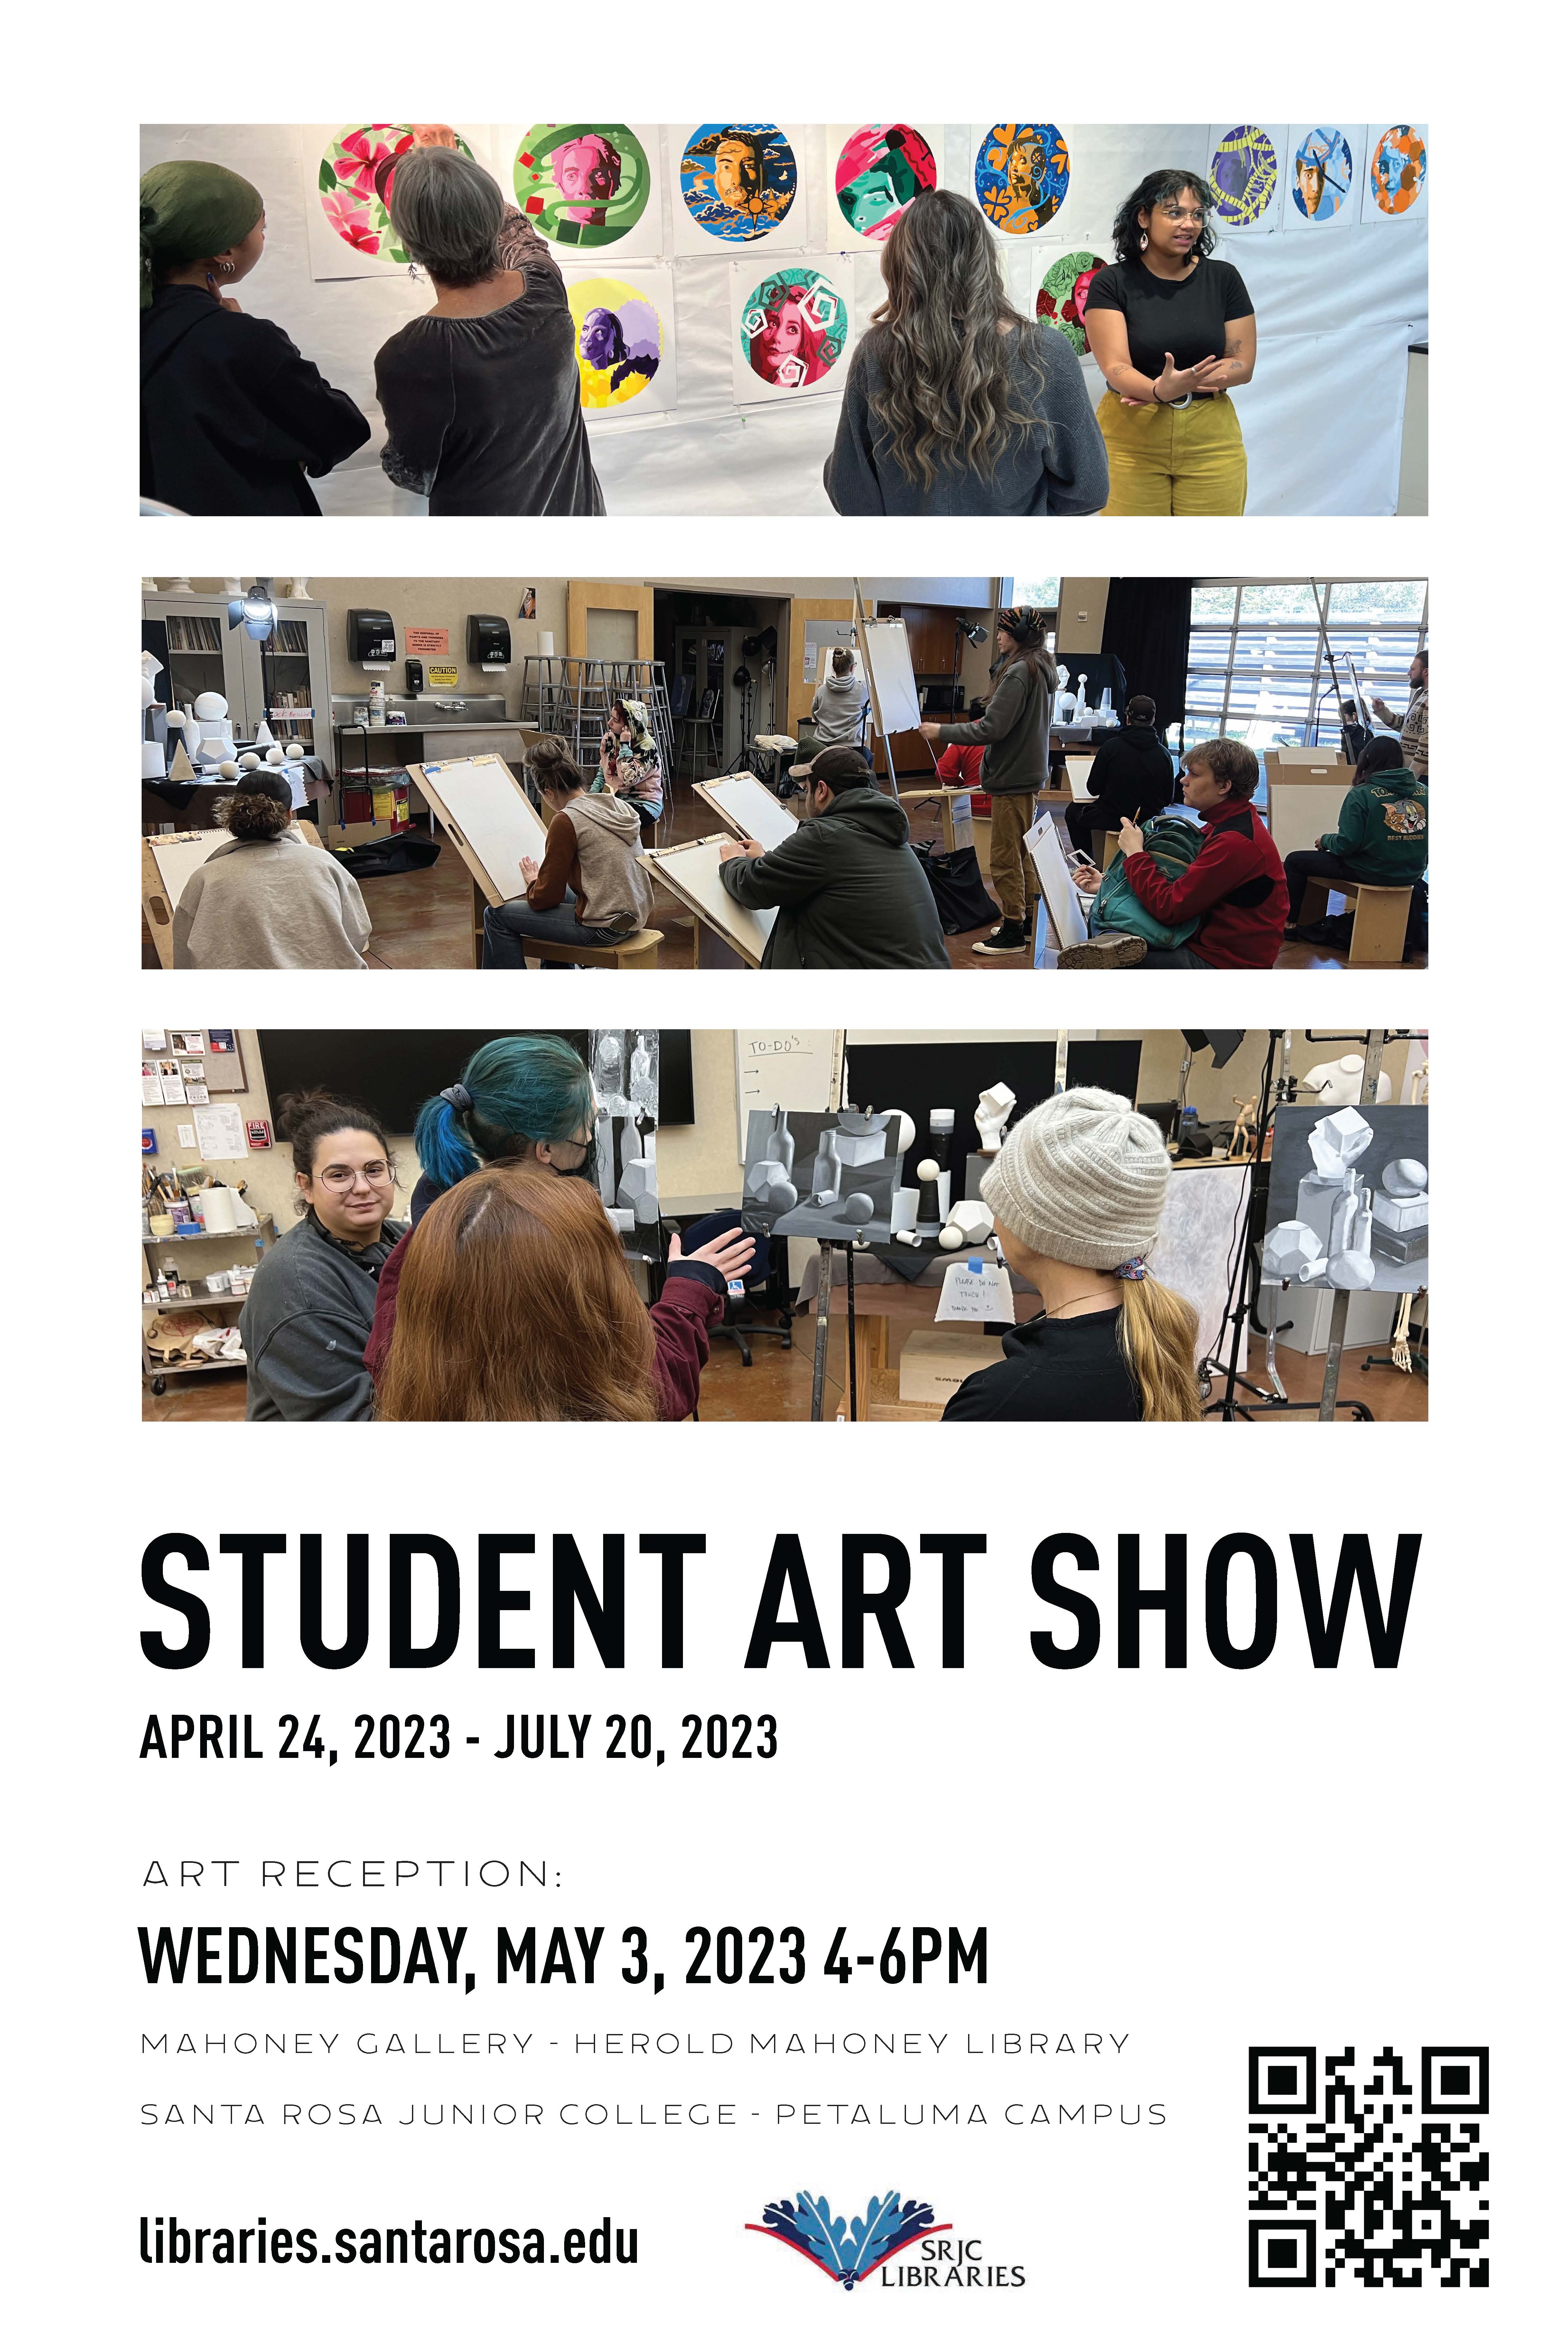 Please join us for the Student Art Show reception at the Herold Mahoney Library. The Student Art Show is a collection of paintings, drawings, and designs created by students from the Petaluma campus art department. We will be celebrating the students and their artwork. Light refreshments will be served.     The Student Art Show reception is Wednesday, May 3, 2023, 4:00-6:00pm.  Work will be on display through July 20th during Mahoney Library open hours.